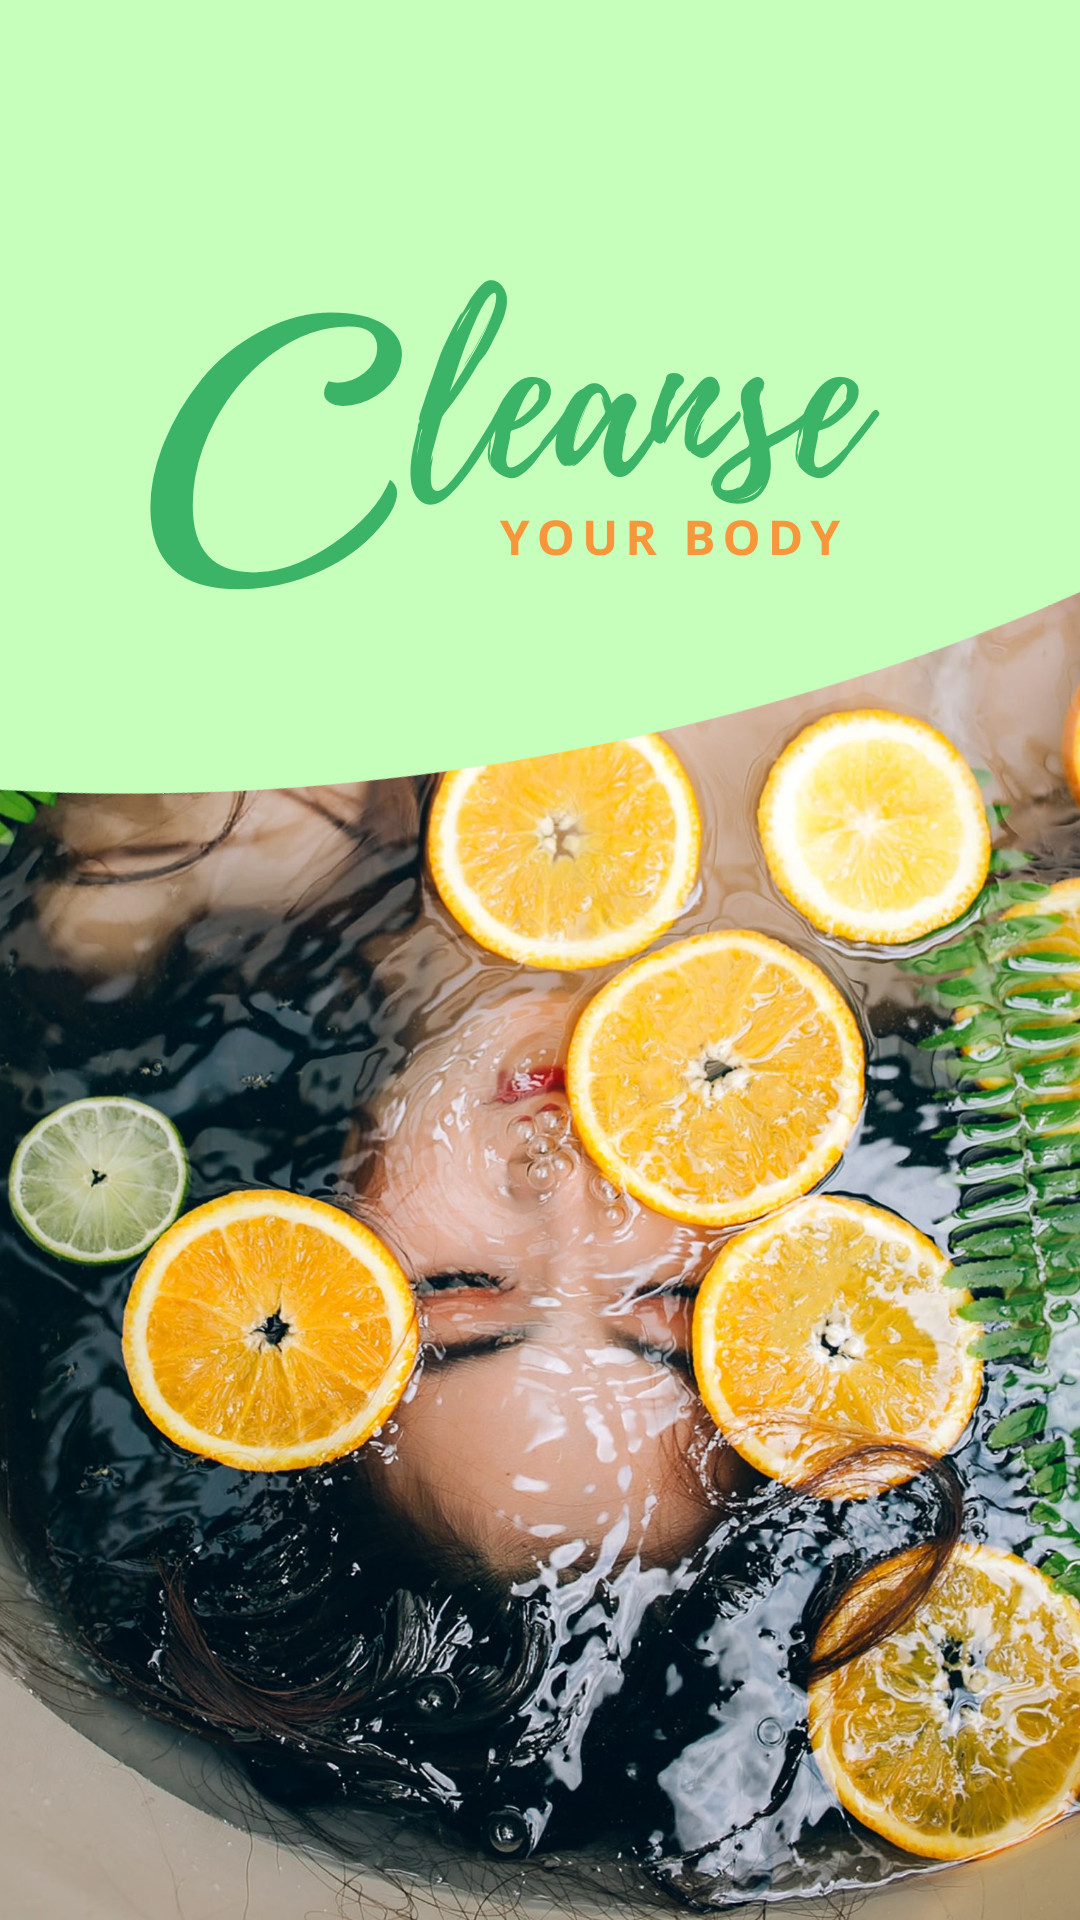 Cleanse Your Body